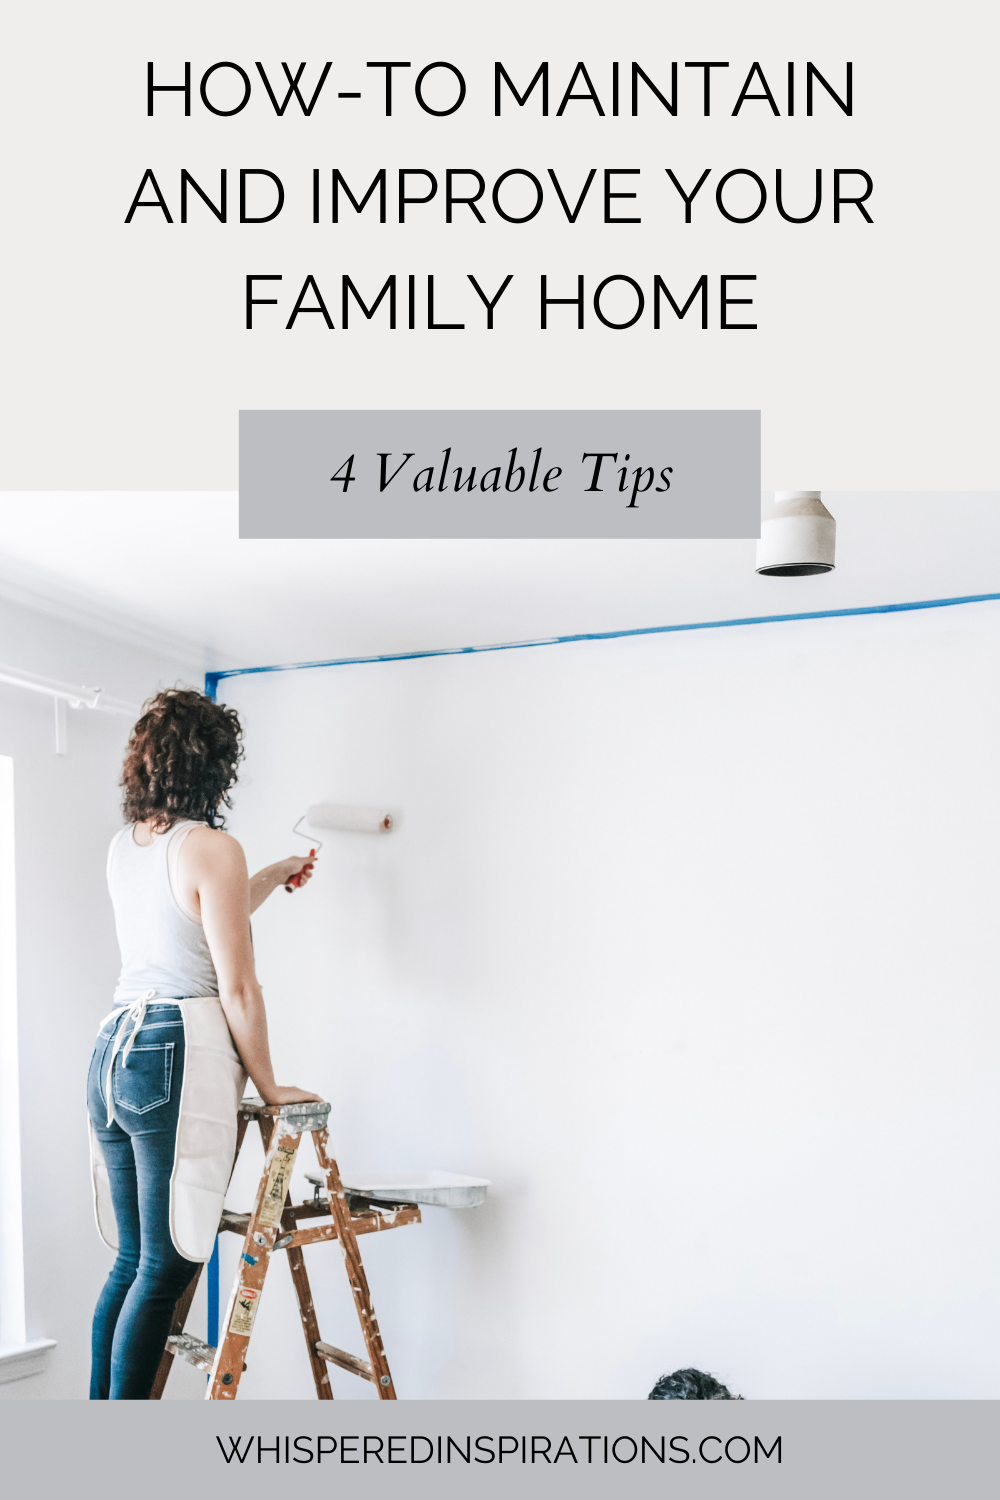 A man and a woman paint a room in their house. This article covers tips for maintaining and improving your family home.